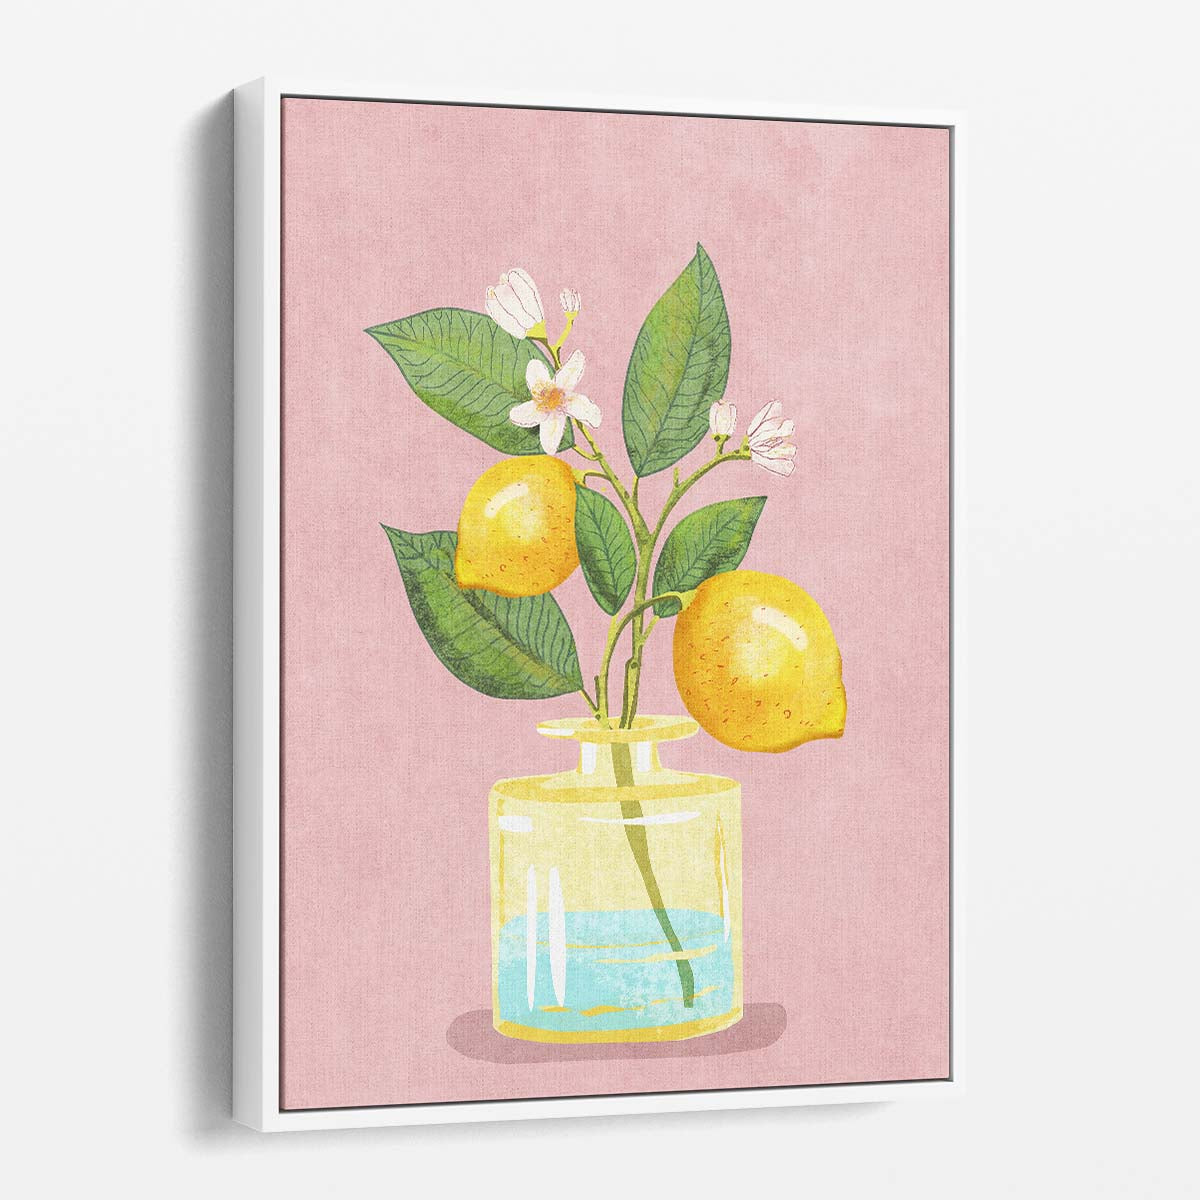 Citrus Still Life Colorful Lemon Bunch in Vase Art Illustration by Luxuriance Designs, made in USA